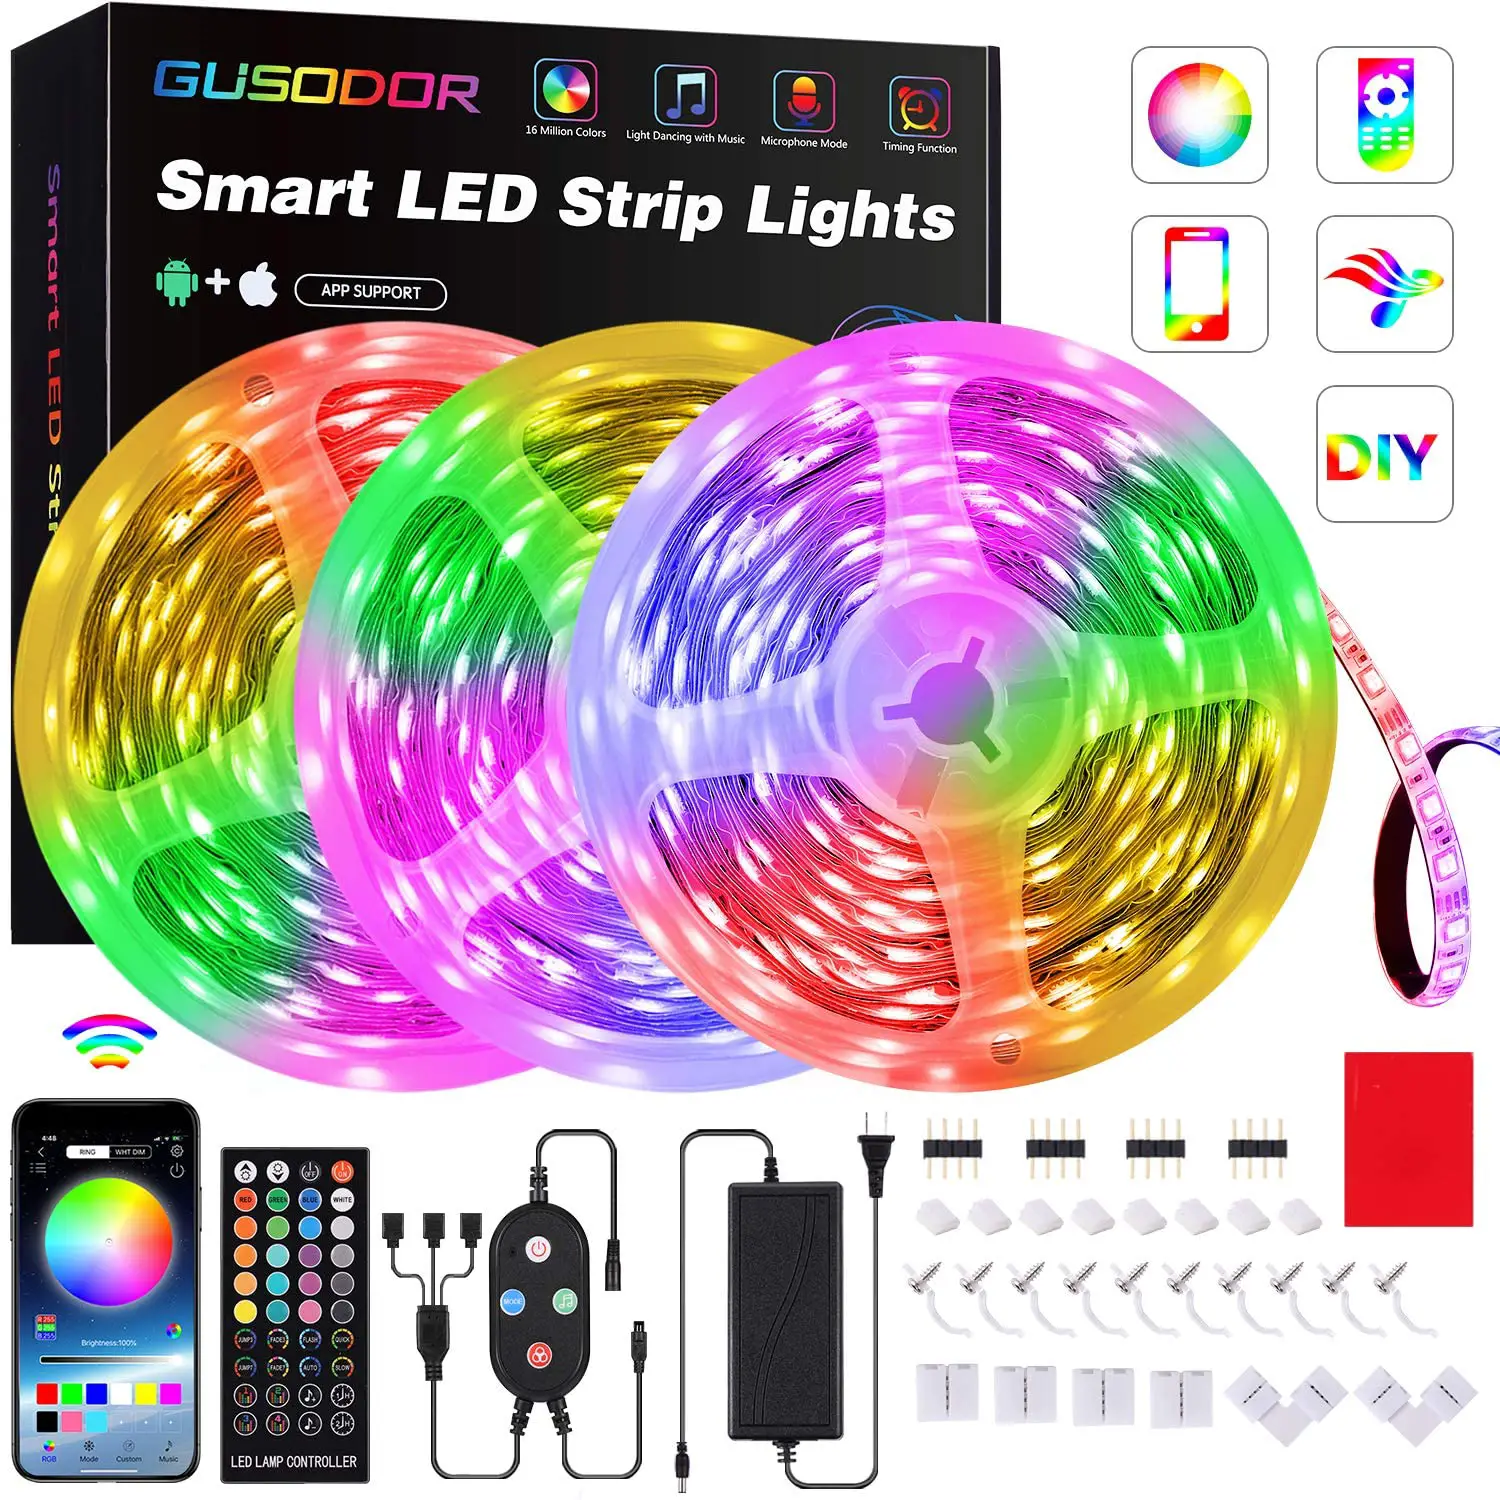 Smartphone and remote control LED lights